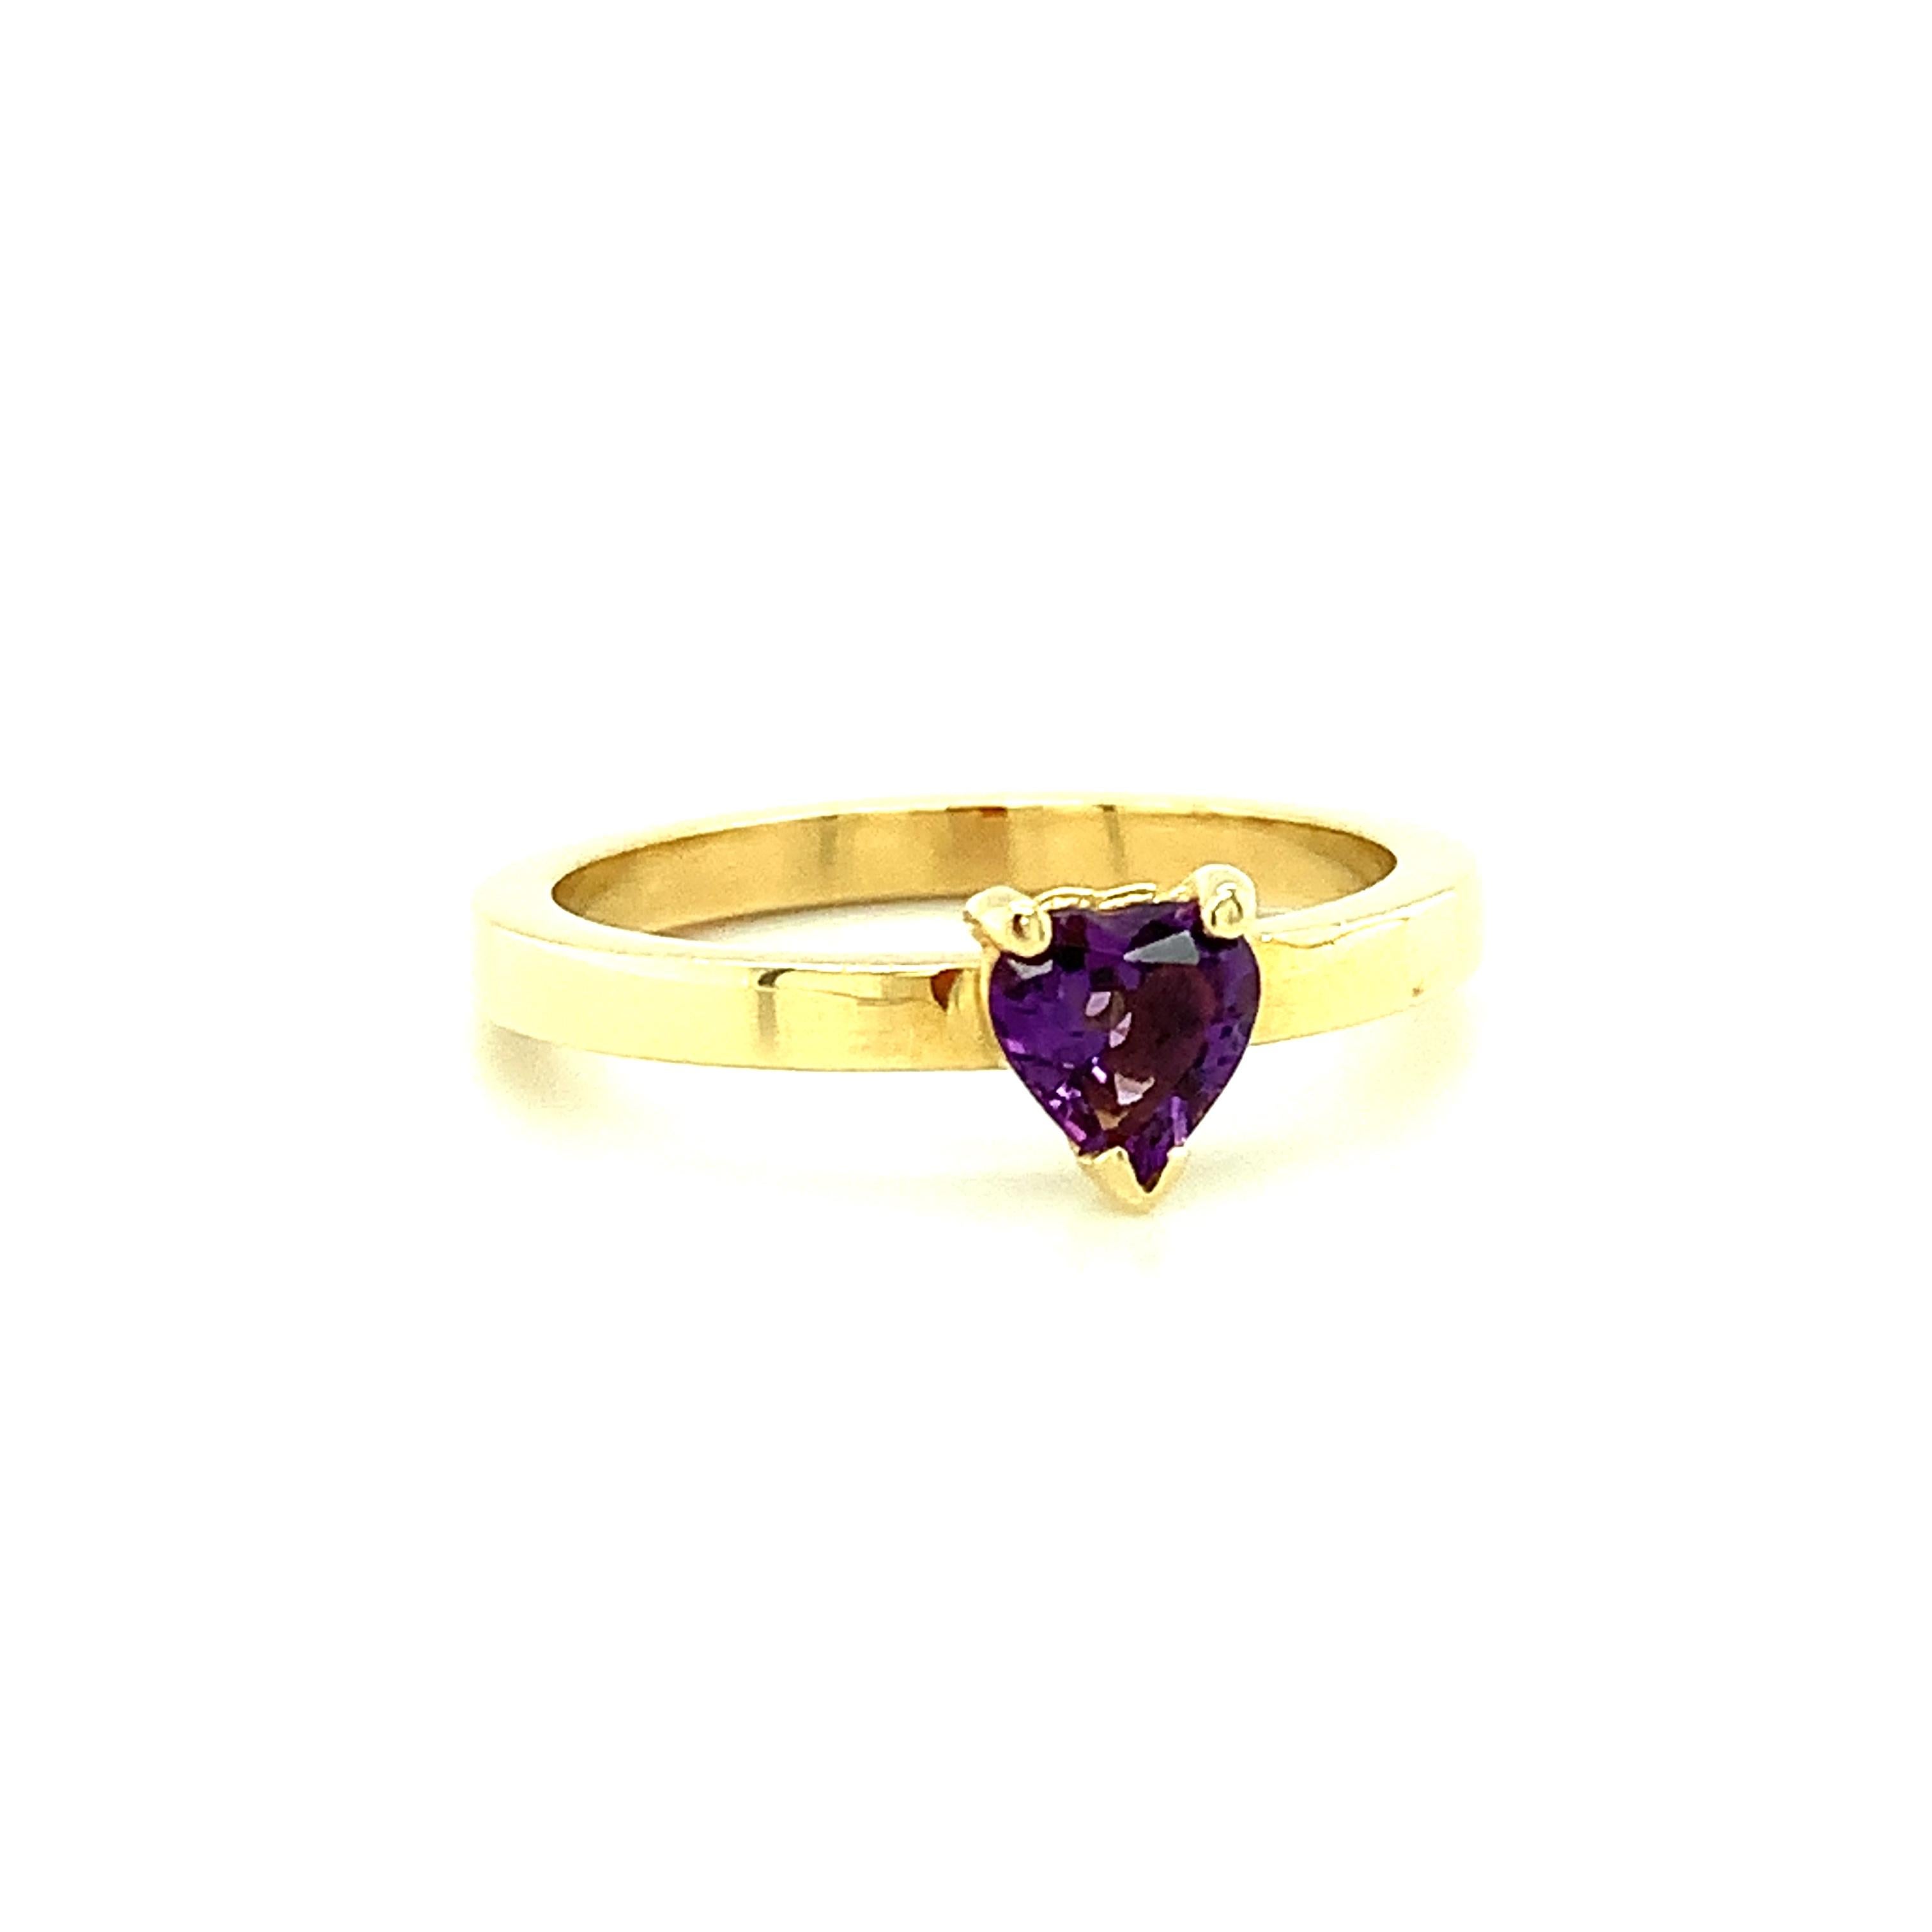 A pretty little heart-shaped amethyst is featured in this stylish 18k yellow gold ring. The band is wide with polished flat sides, designed to be either worn alone or easily 